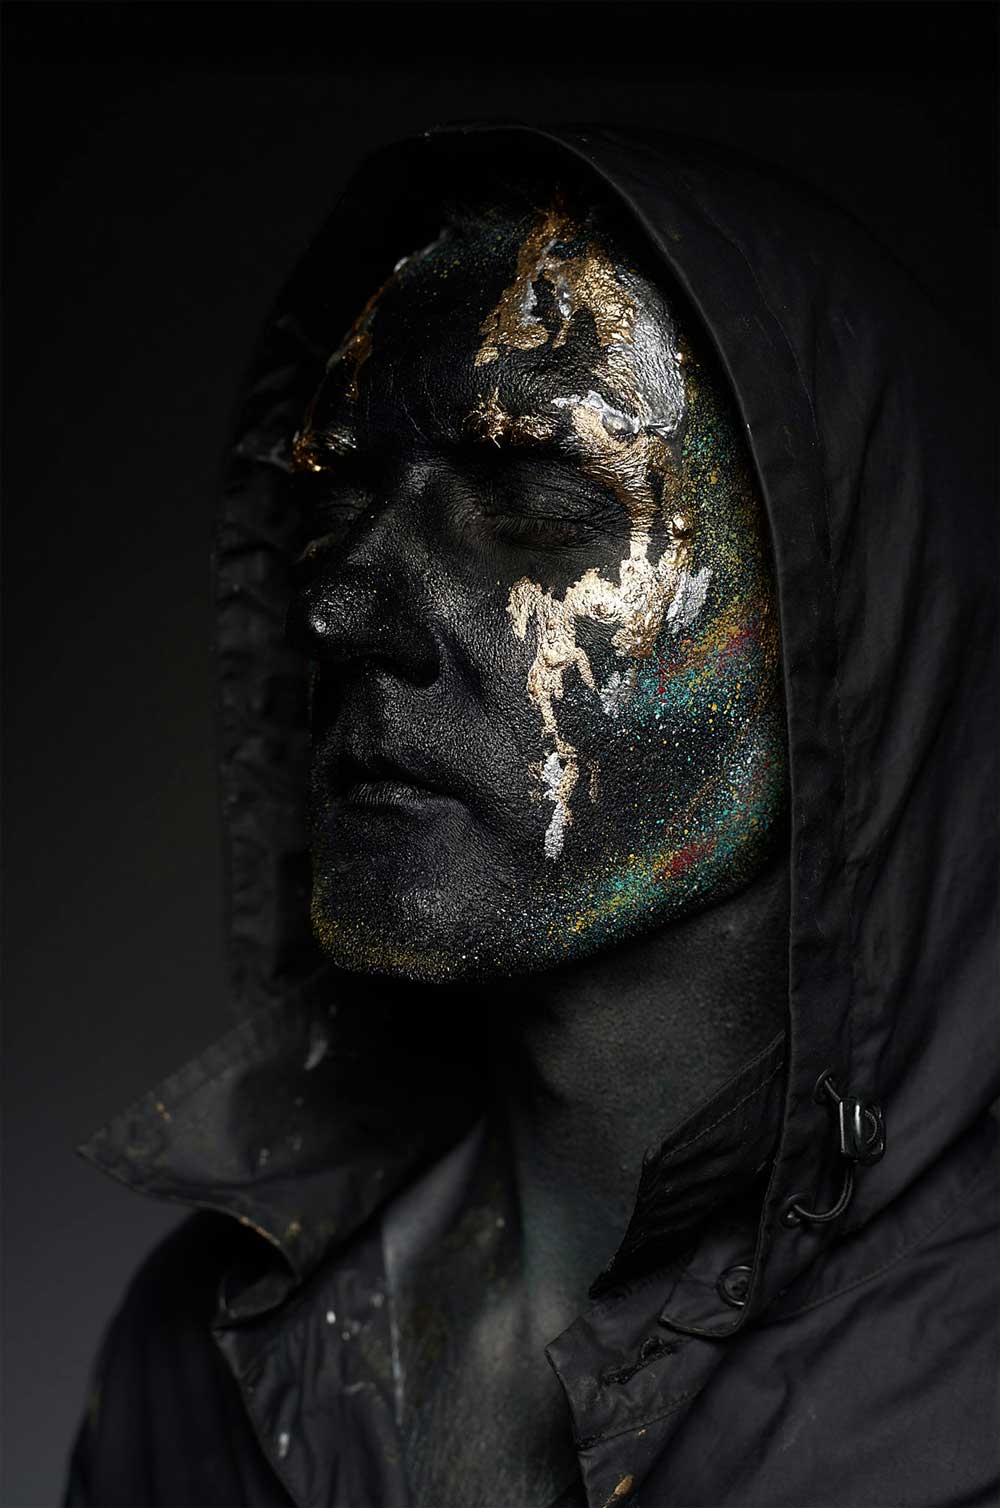 a portrait of a man wearing a black hoodie and his face is also black having an abstract gold design on his face with a dark and black background.